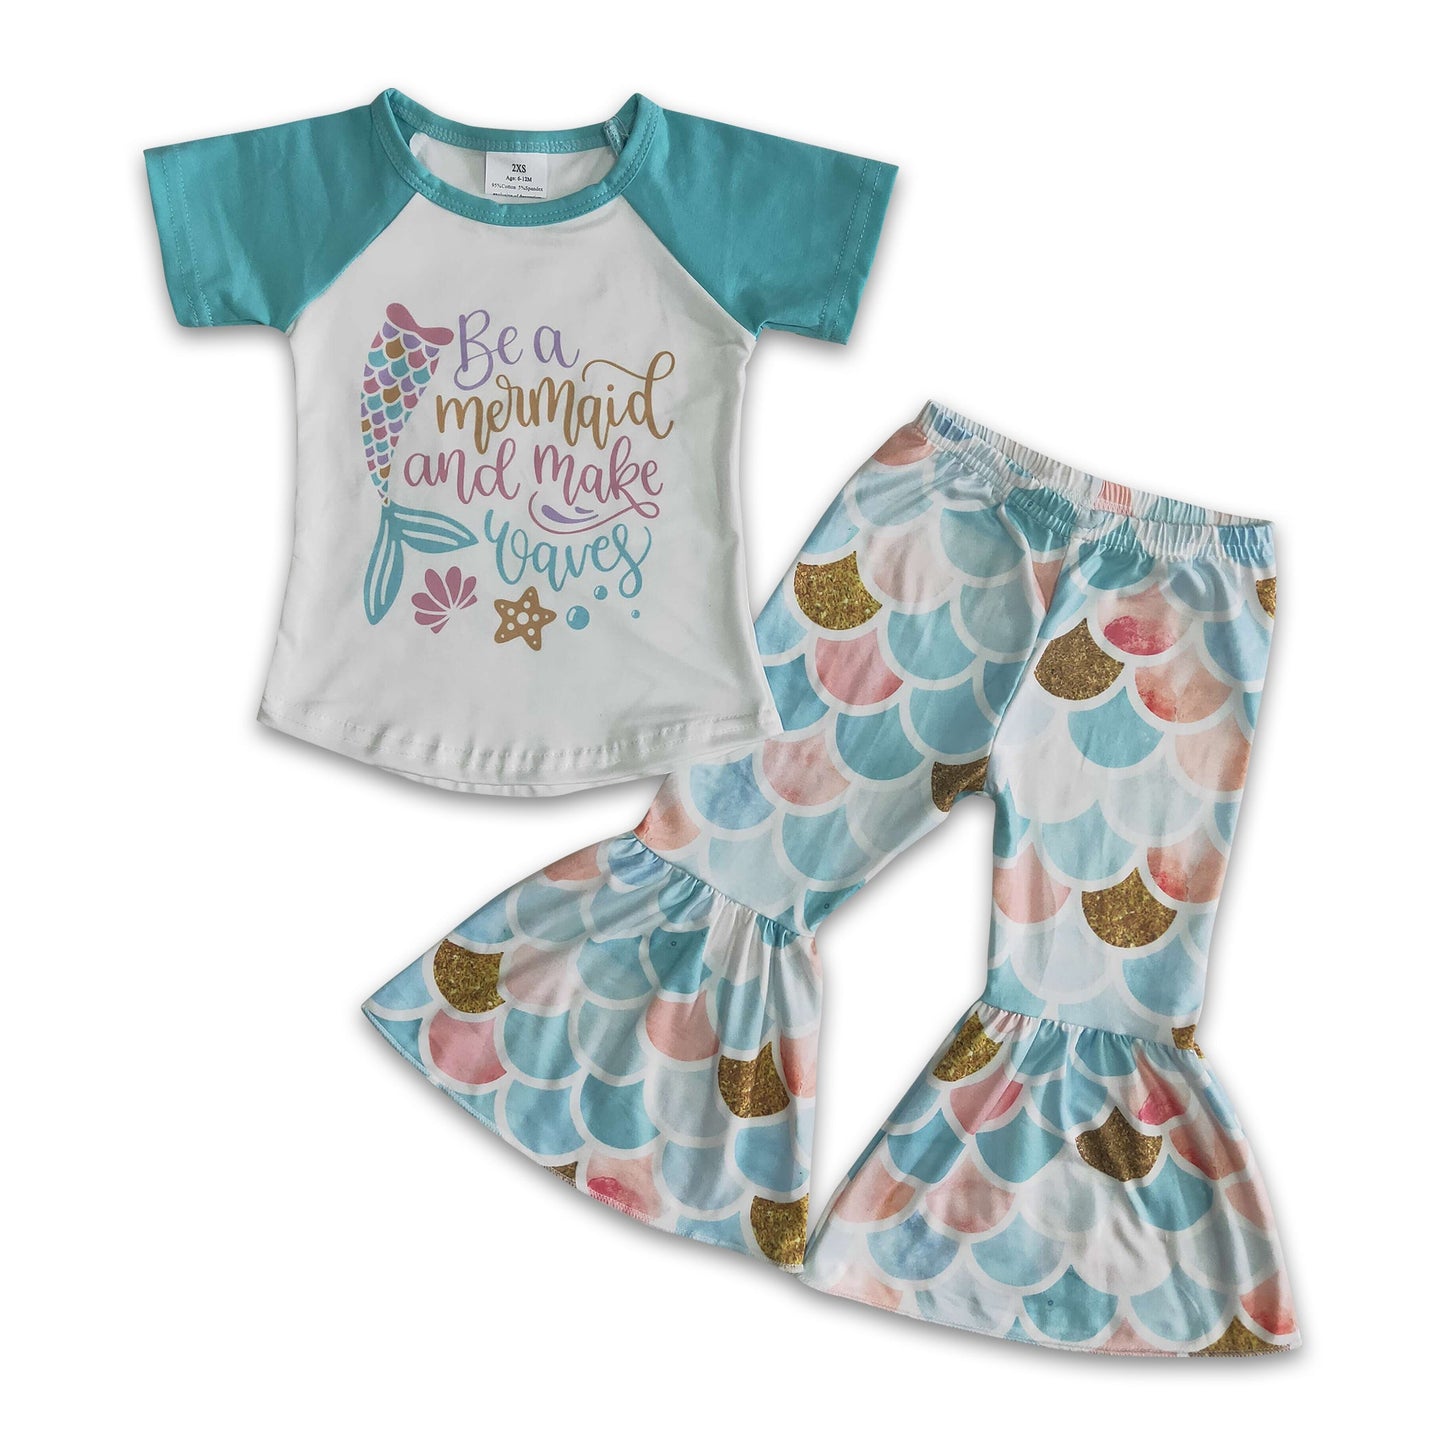 Mermaid scale pants outfits